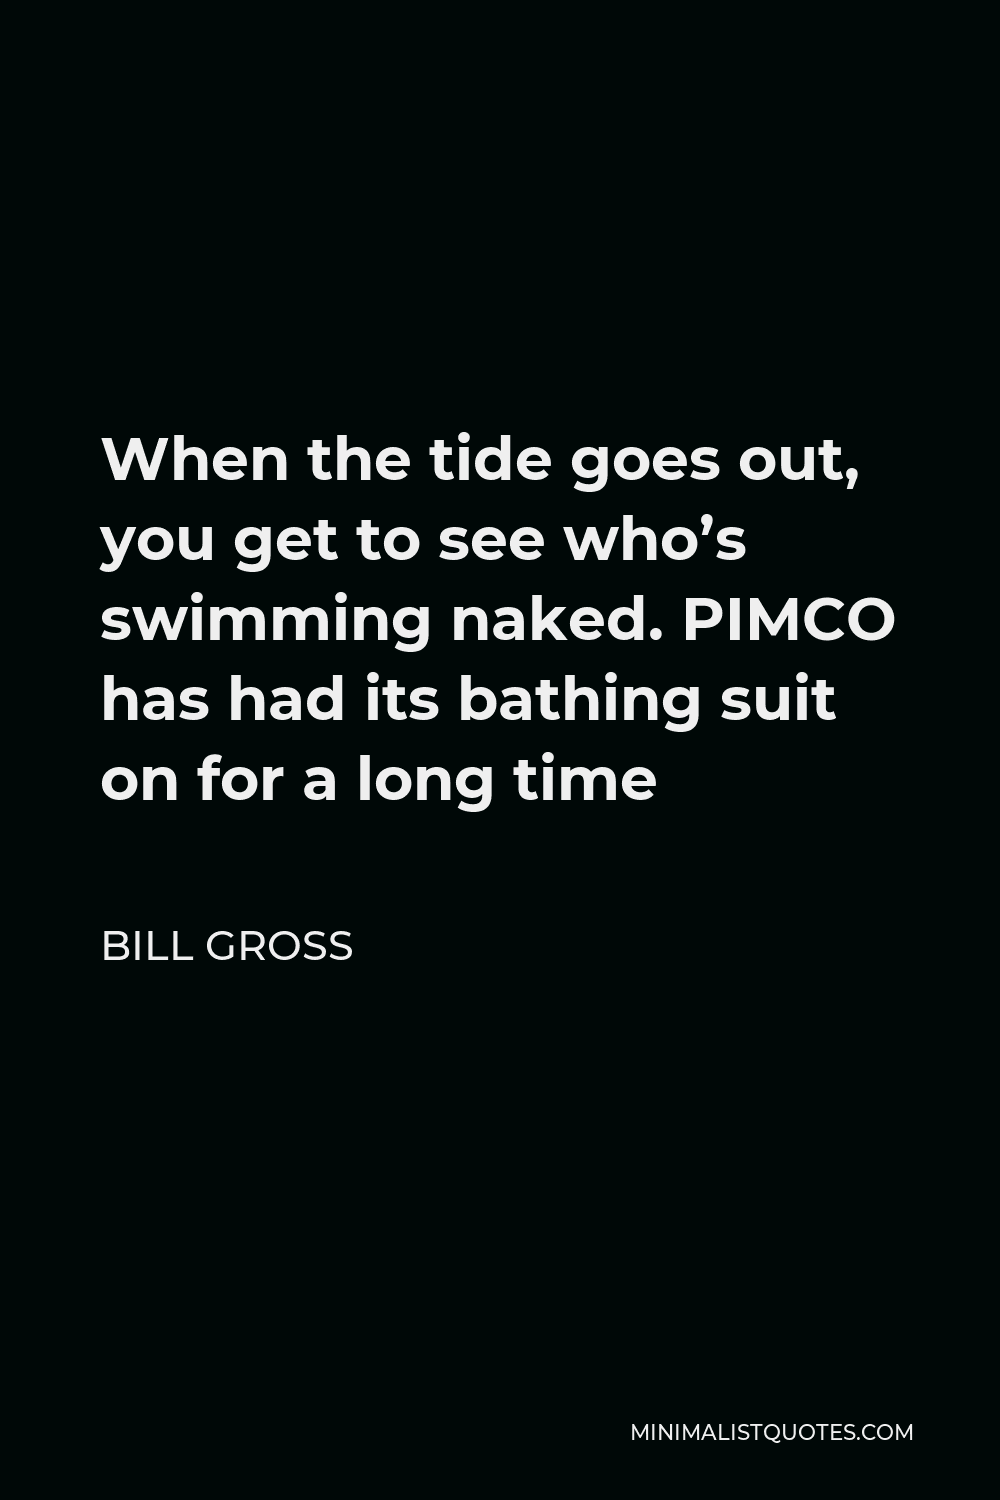 Bill Gross Quote - When the tide goes out, you get to see who’s swimming naked. PIMCO has had its bathing suit on for a long time